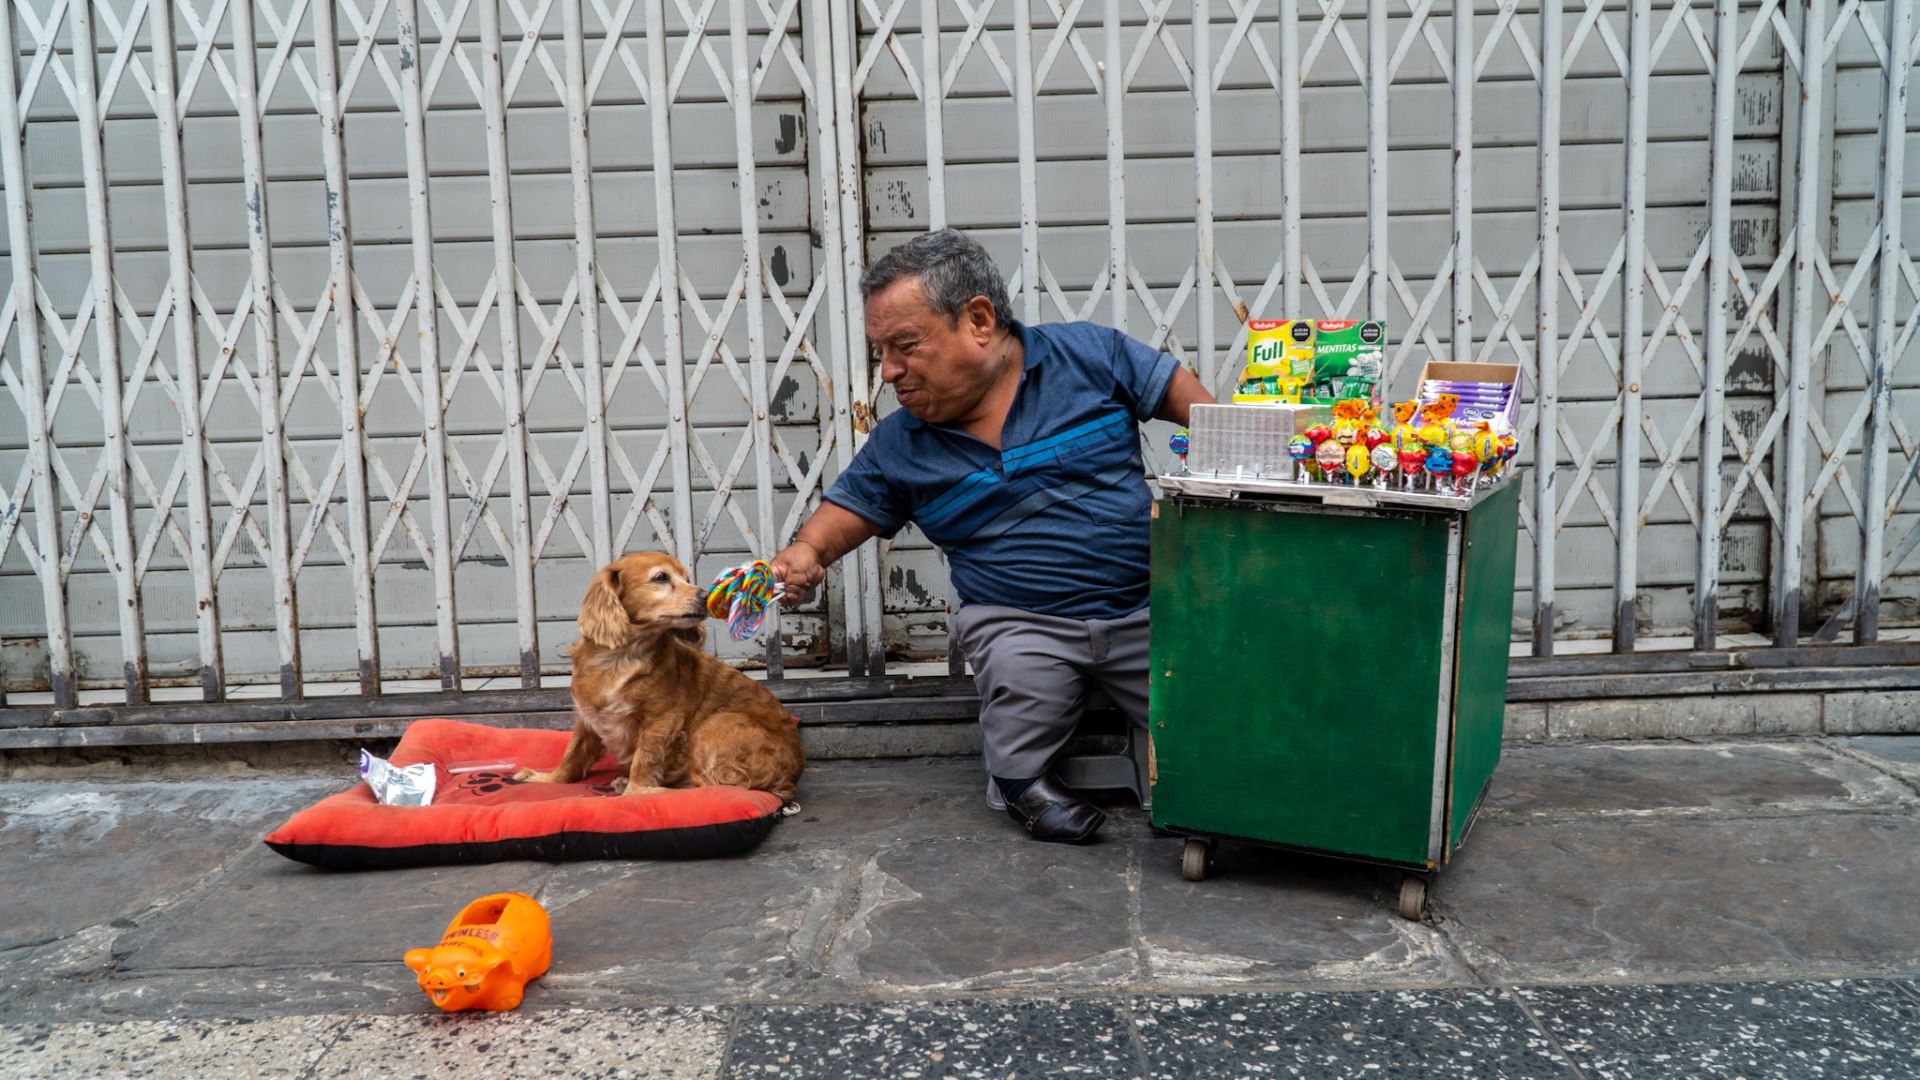 A street vendor in Peru, with his dog